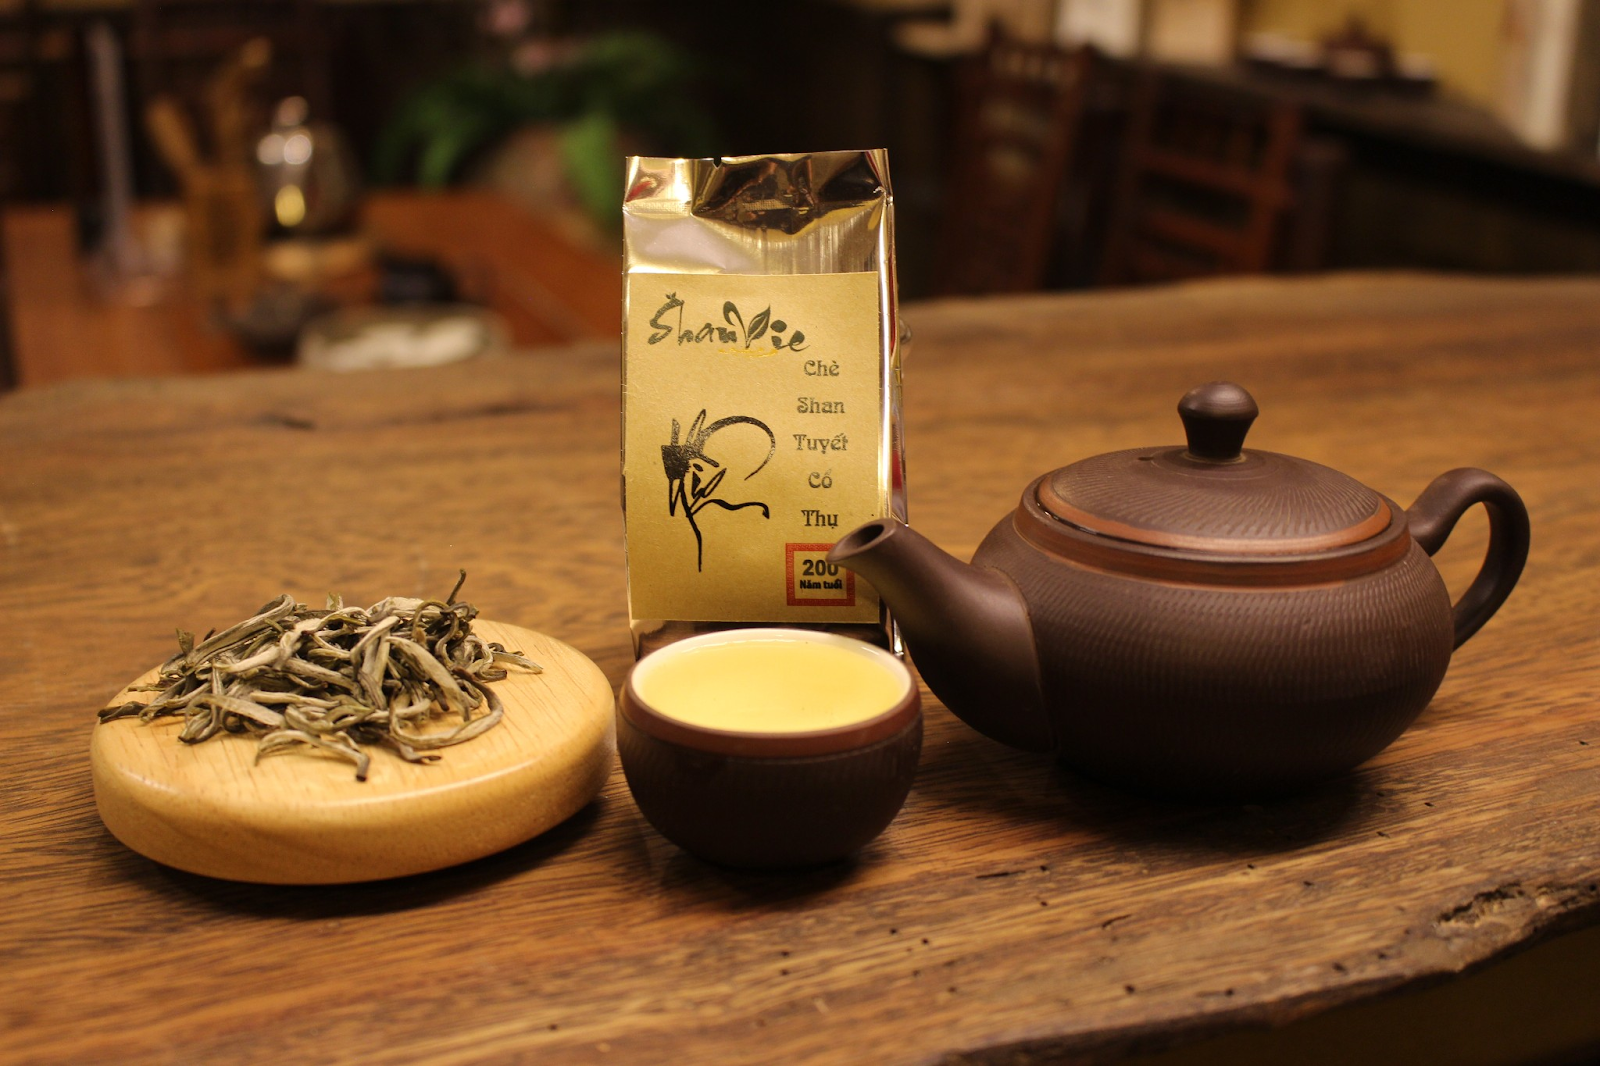 Tea are the must-try souvenirs from Vietnam